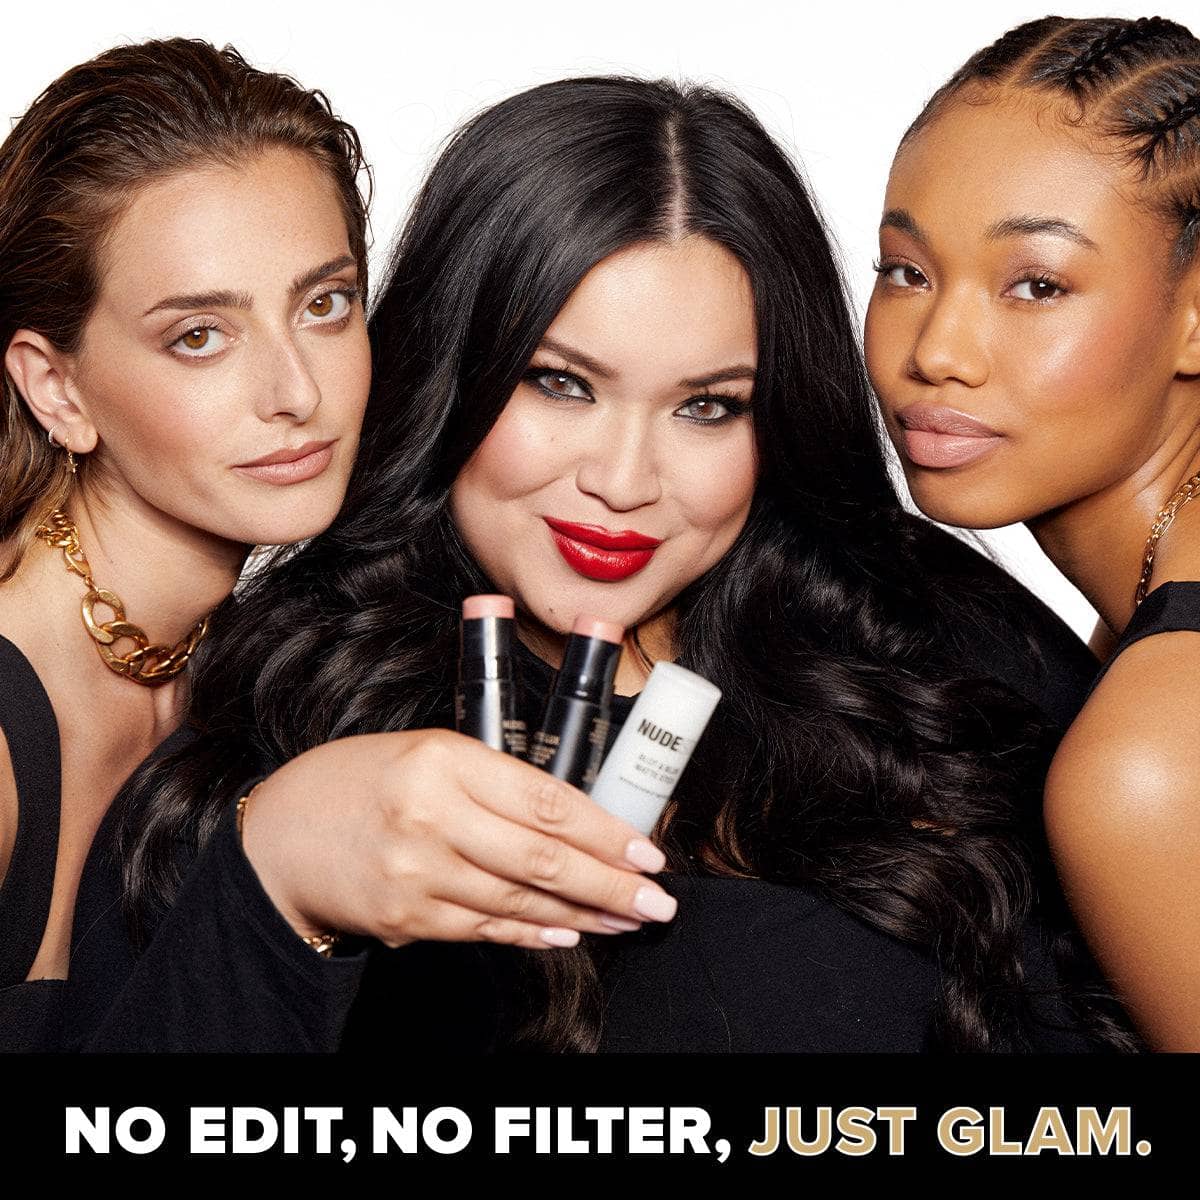 Glamzilla, Taylor Frankel and Model posing together with No Edit, No Filter, Just Glam kit